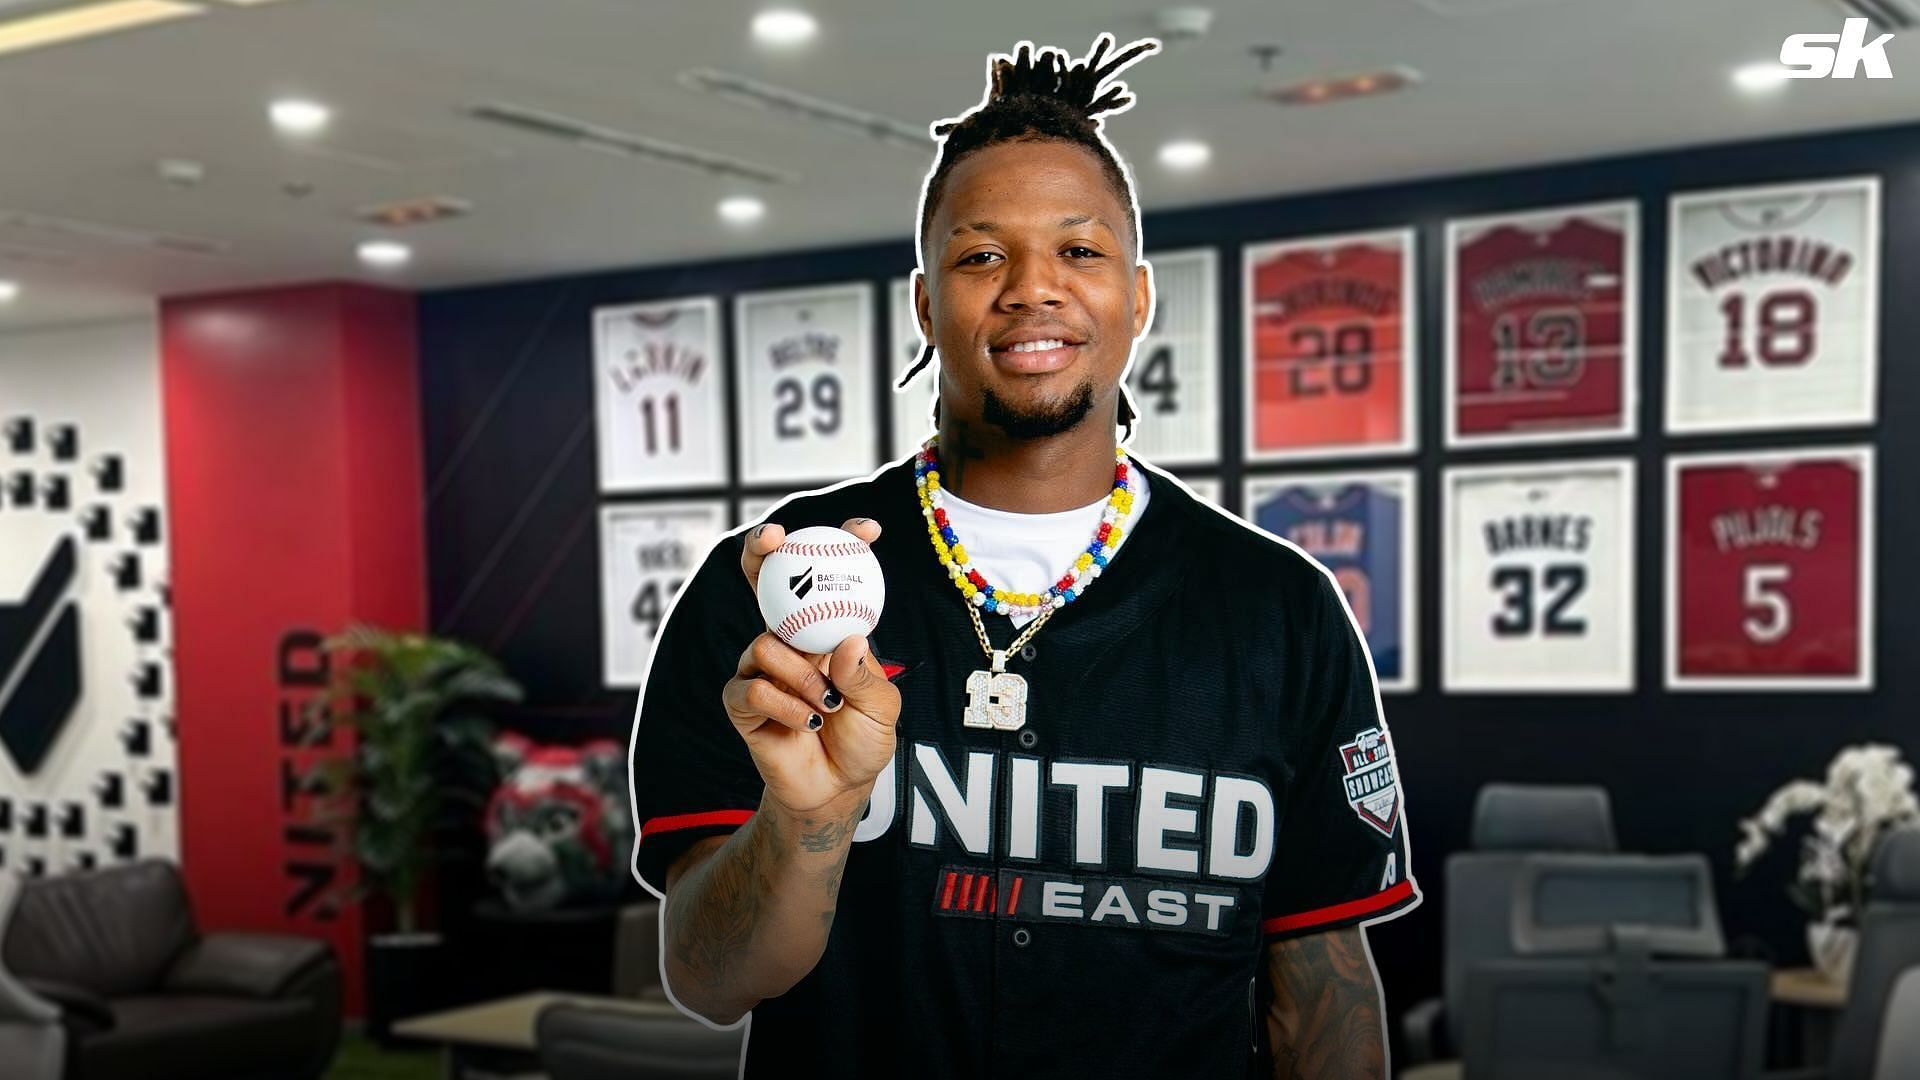 &quot;Our Saudi prince&quot; - Fans congratulate Ronald Acu&ntilde;a Jr. for joining Baseball United